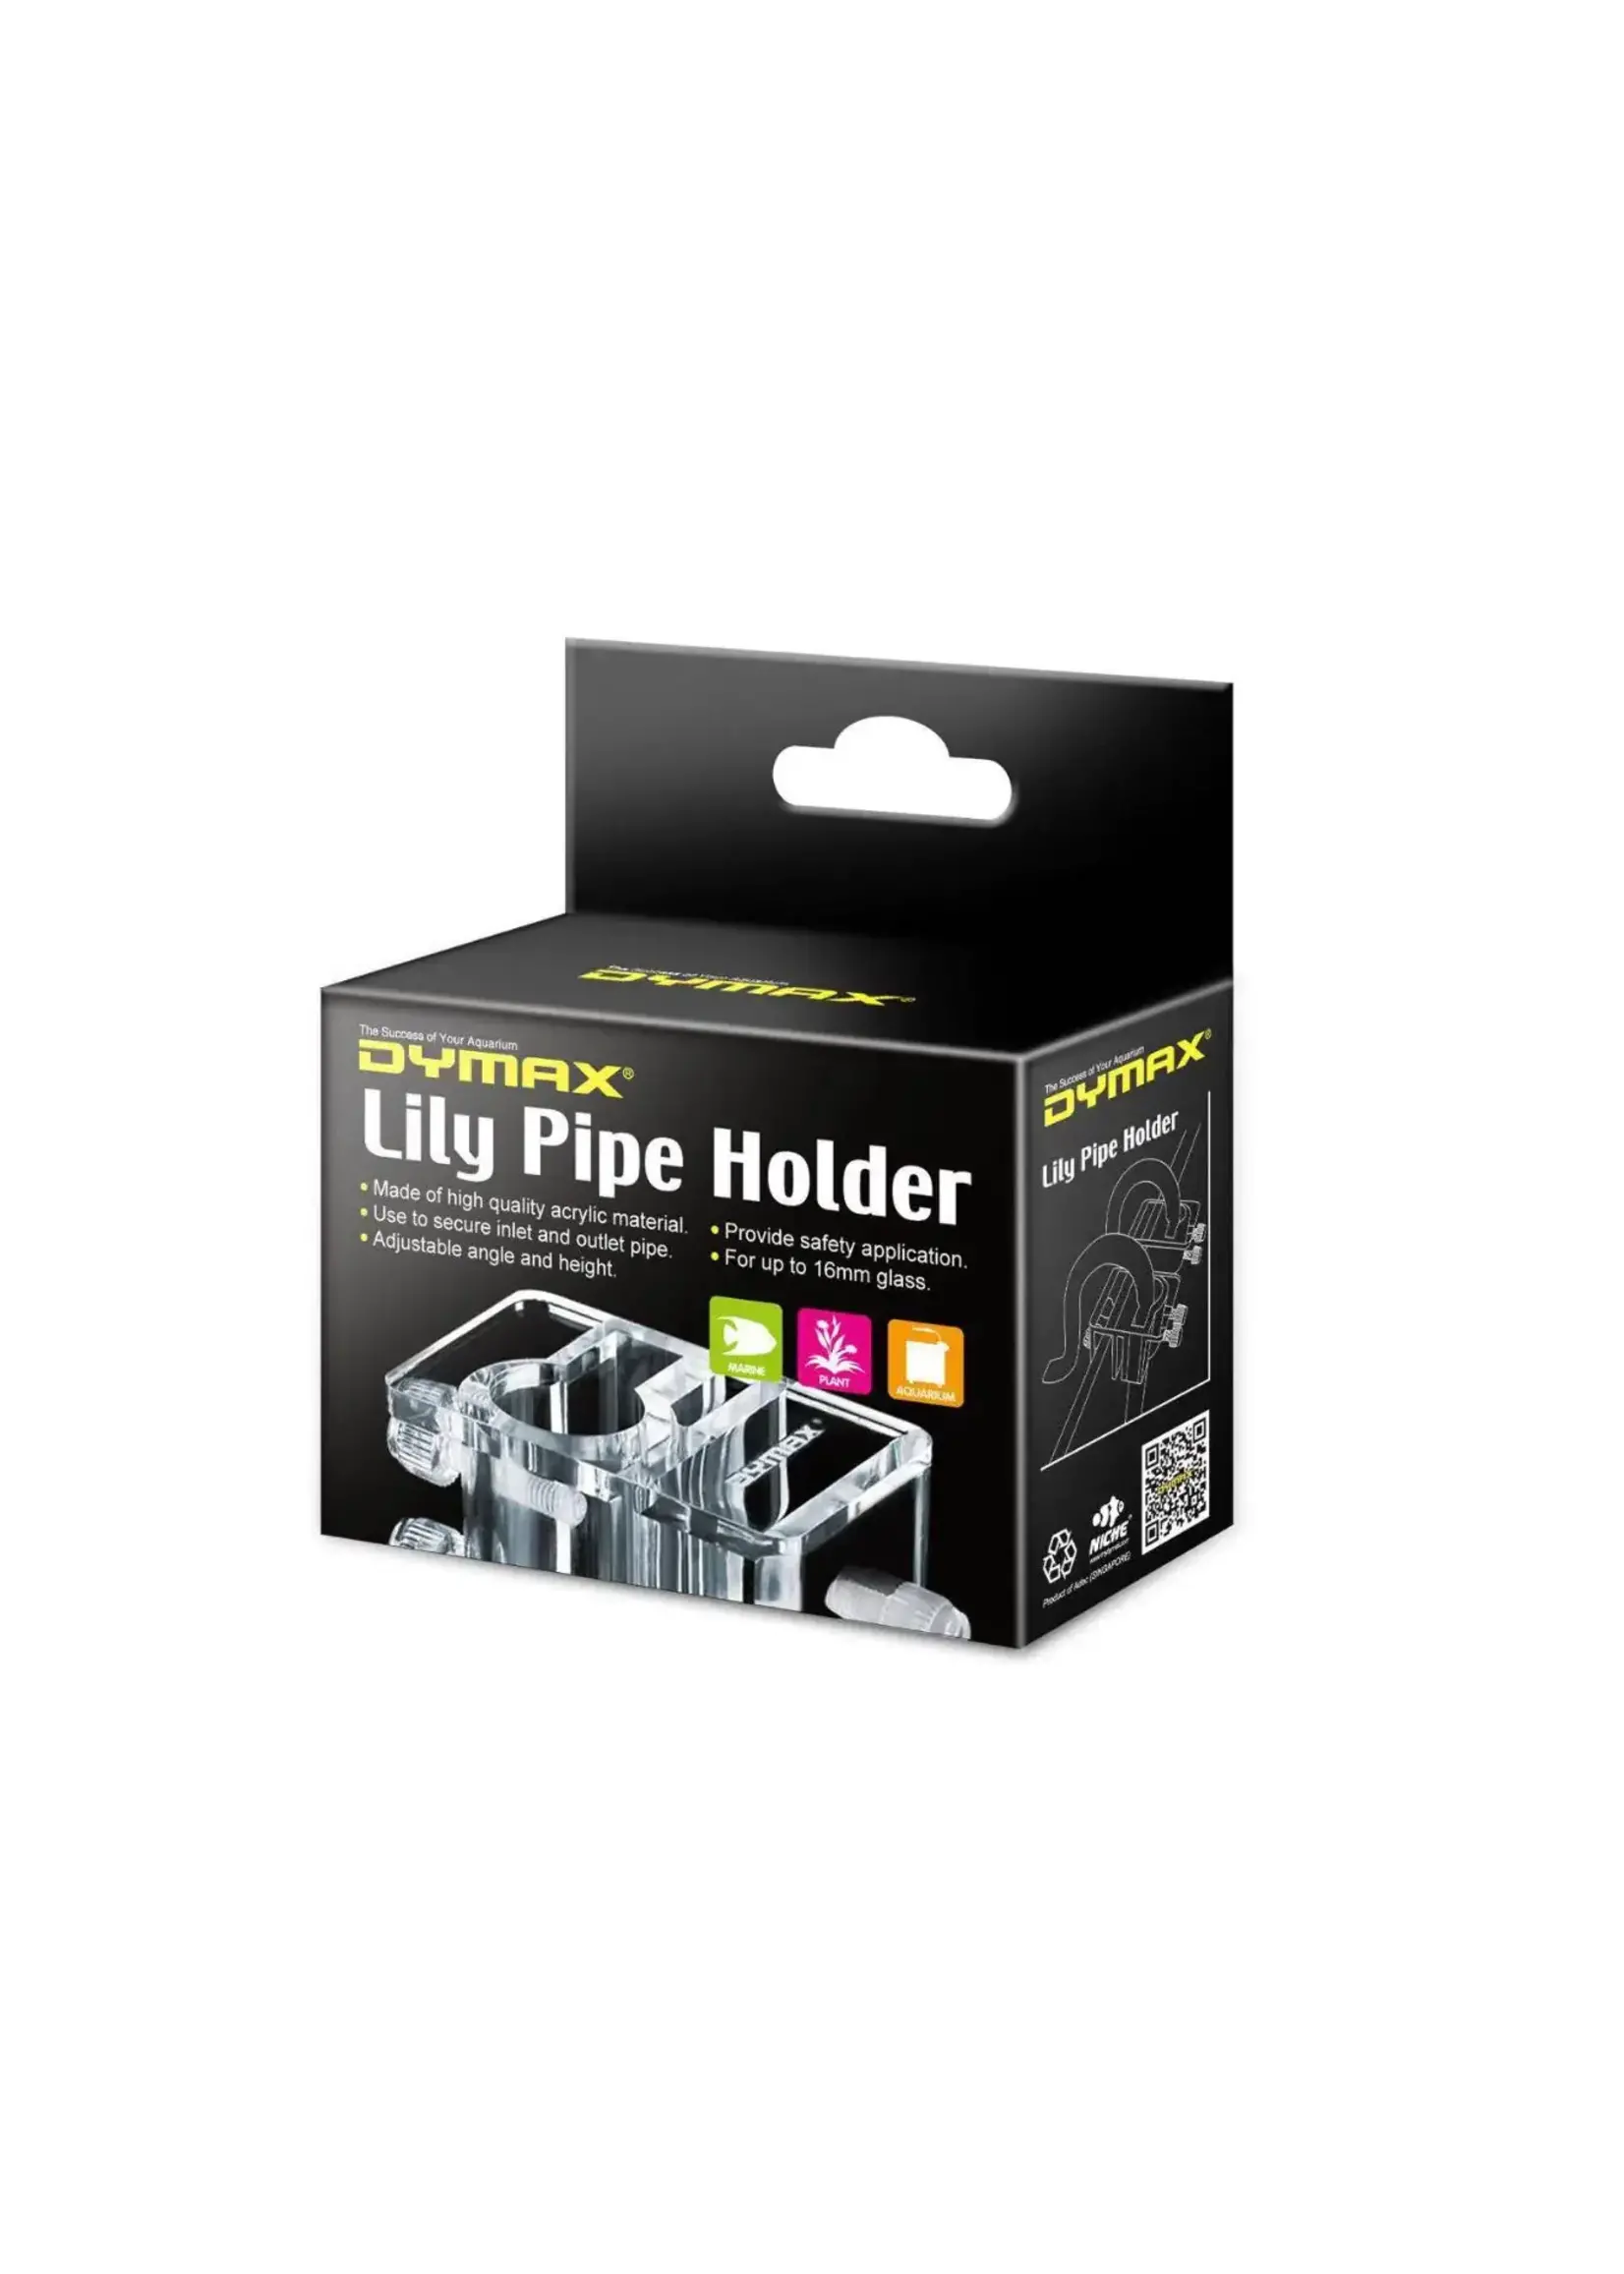 Dymax LILY PIPE HOLDER 2 PACK